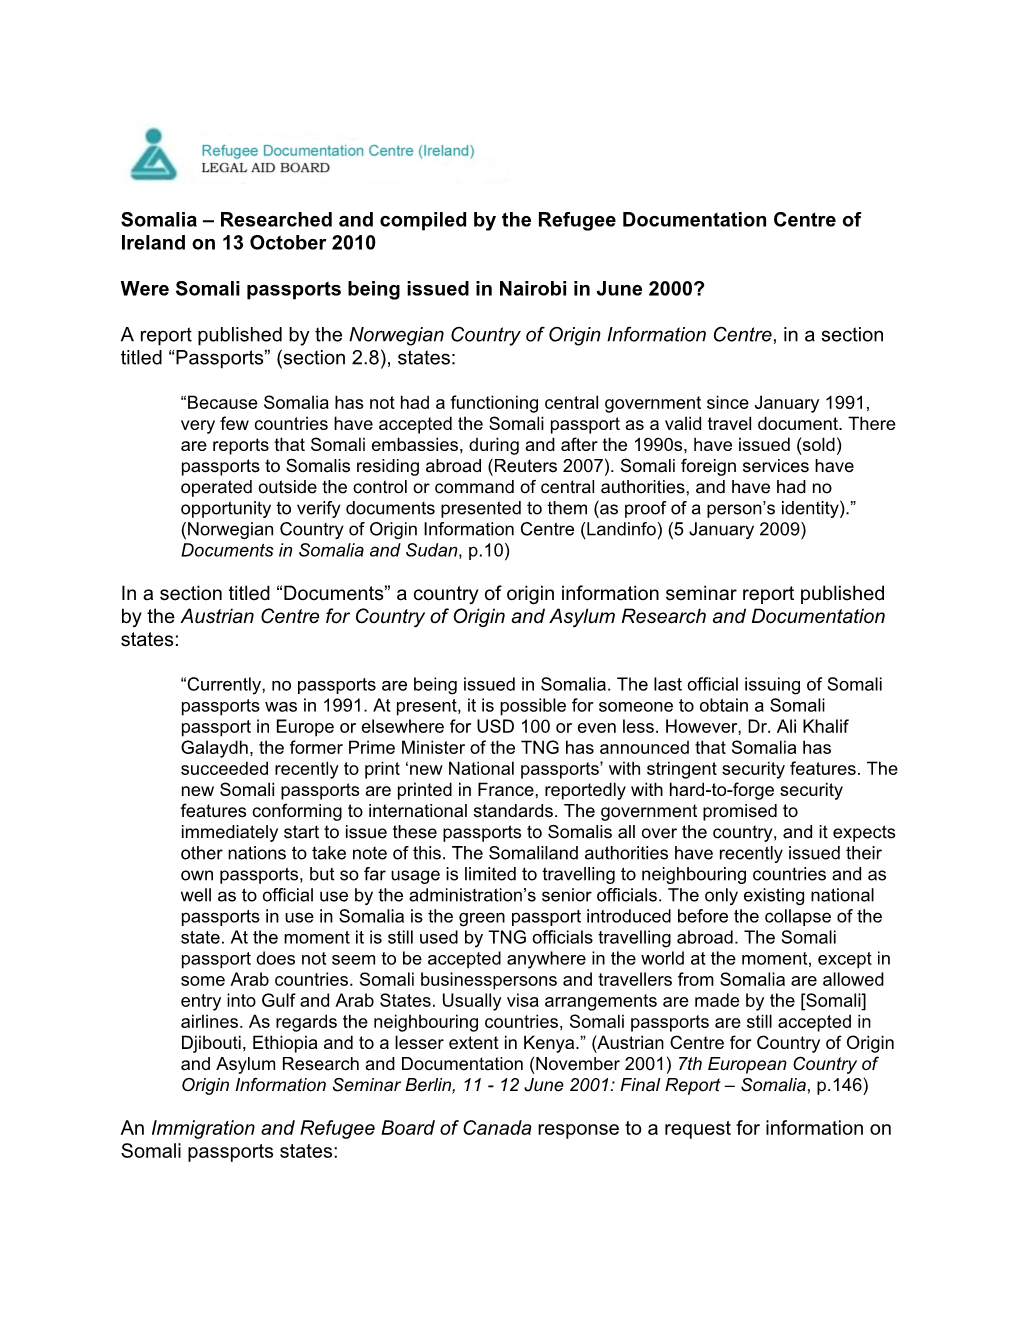 Somalia – Researched and Compiled by the Refugee Documentation Centre of Ireland on 13 October 2010